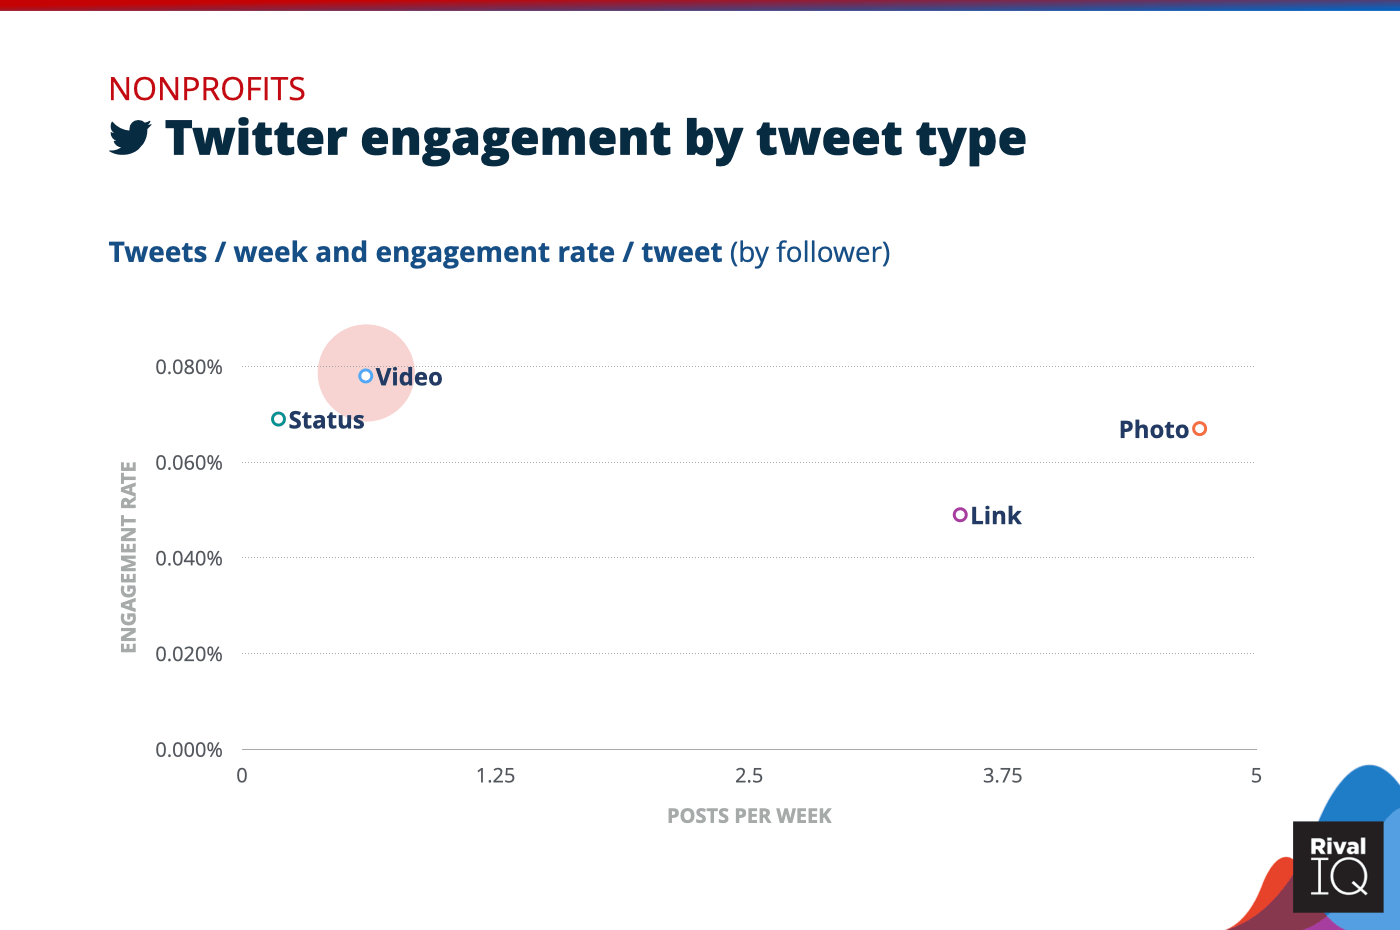 Chart of Twitter posts per week and engagement rate by tweet type, Nonprofits